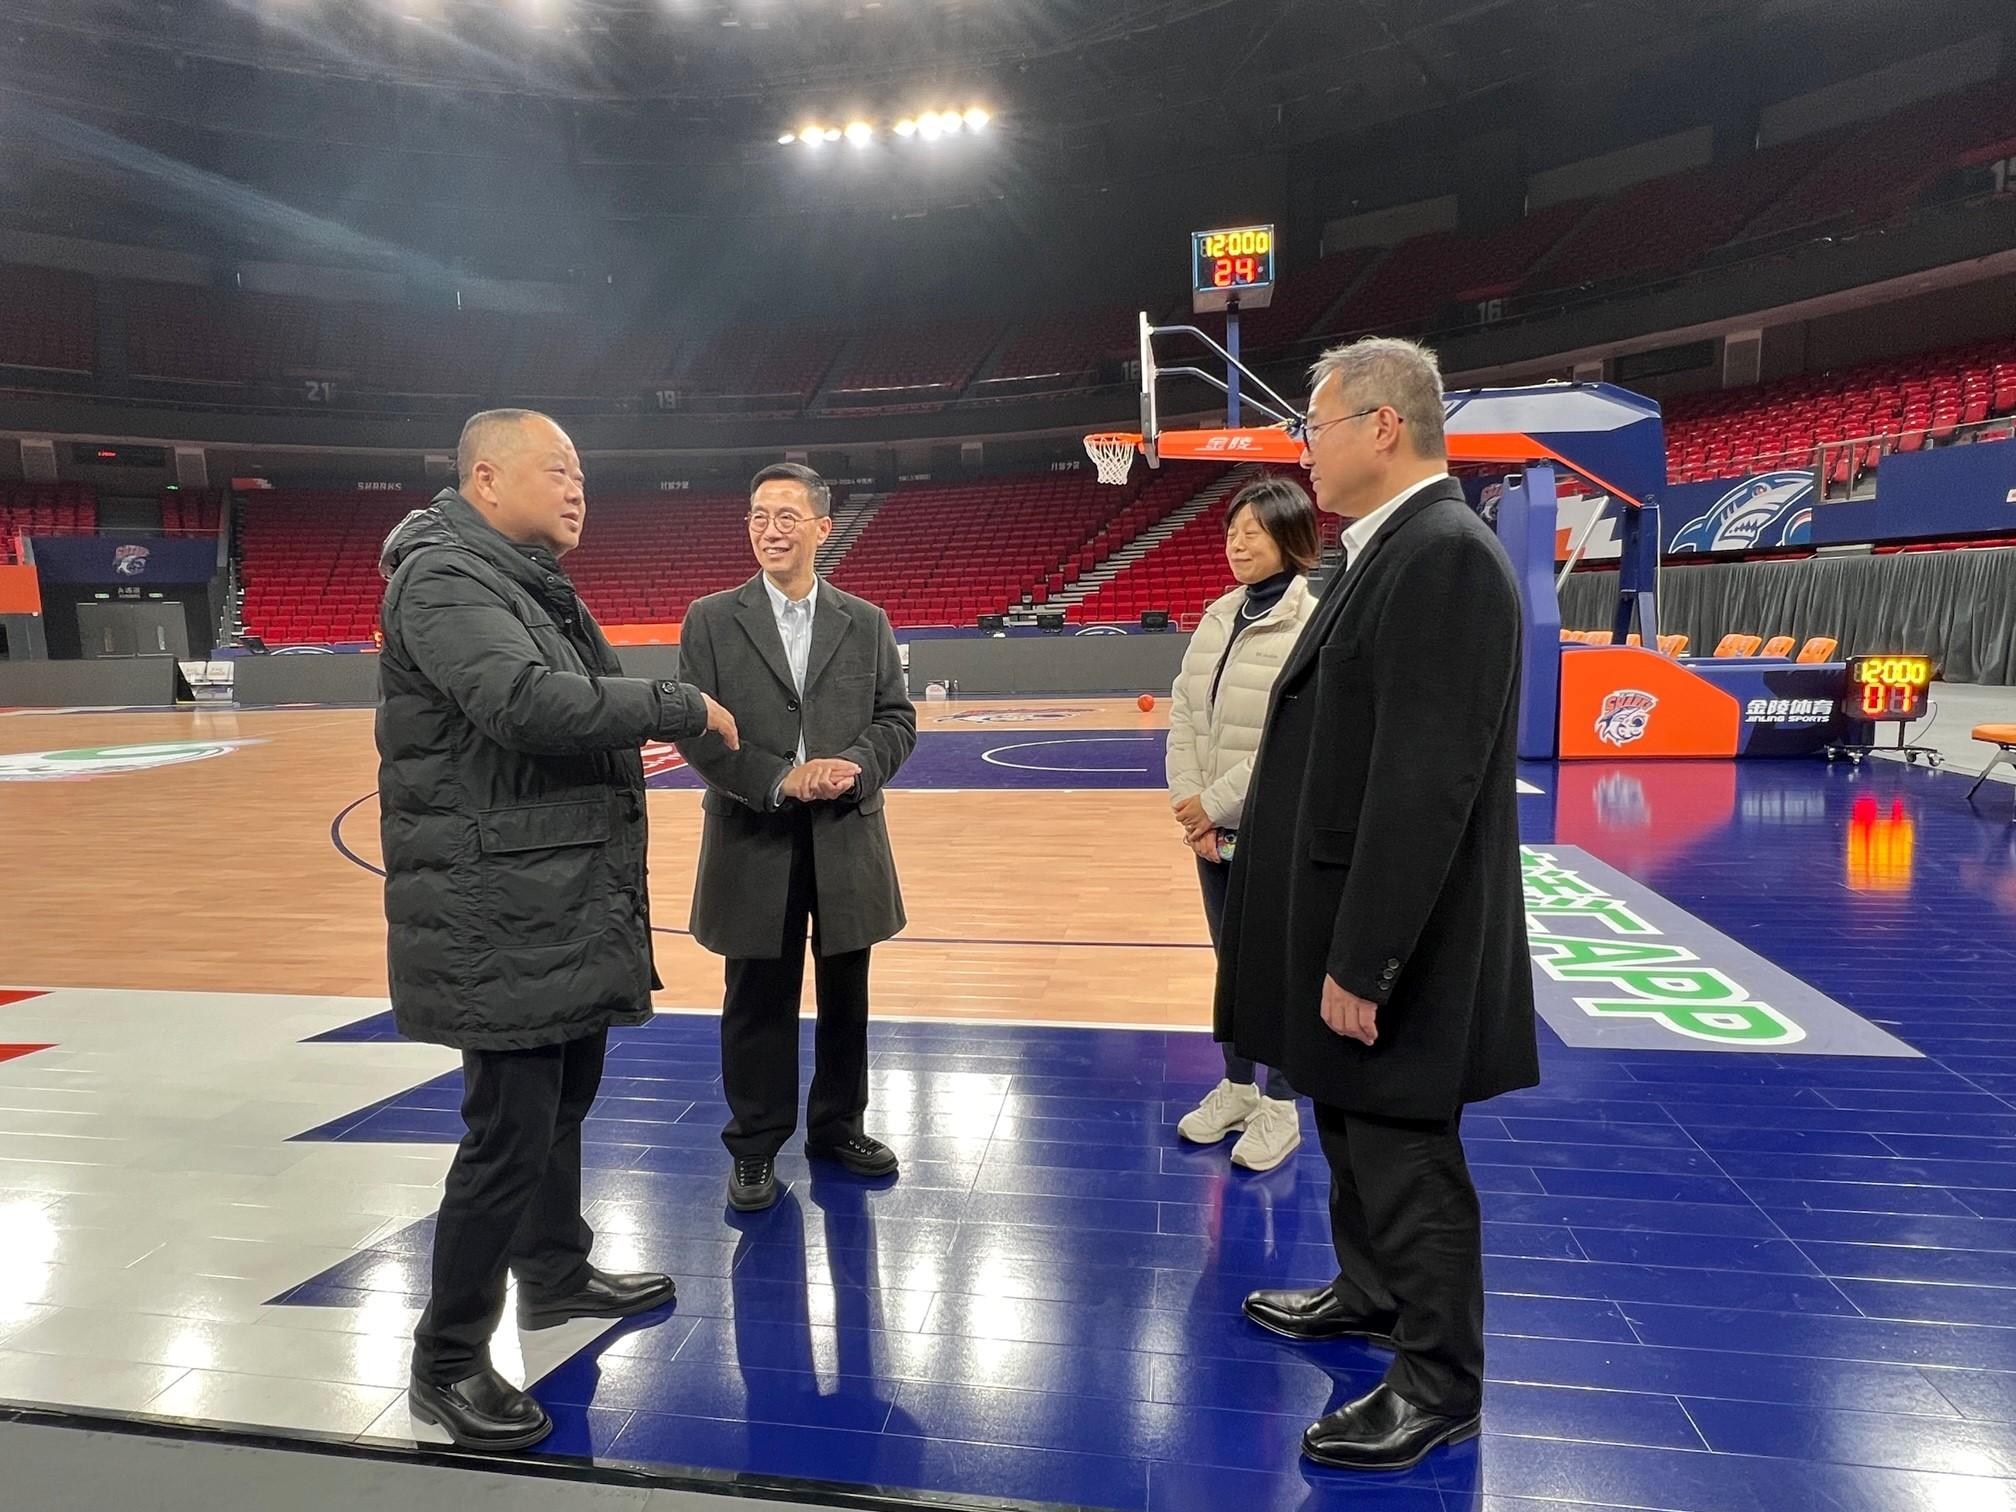 The Secretary for Culture, Sports and Tourism, Mr Kevin Yeung (second left), today (January 9) visited Shanghai Stadium in Shanghai. The Permanent Secretary for Culture, Sports and Tourism, Mr Joe Wong (first right), was also present.